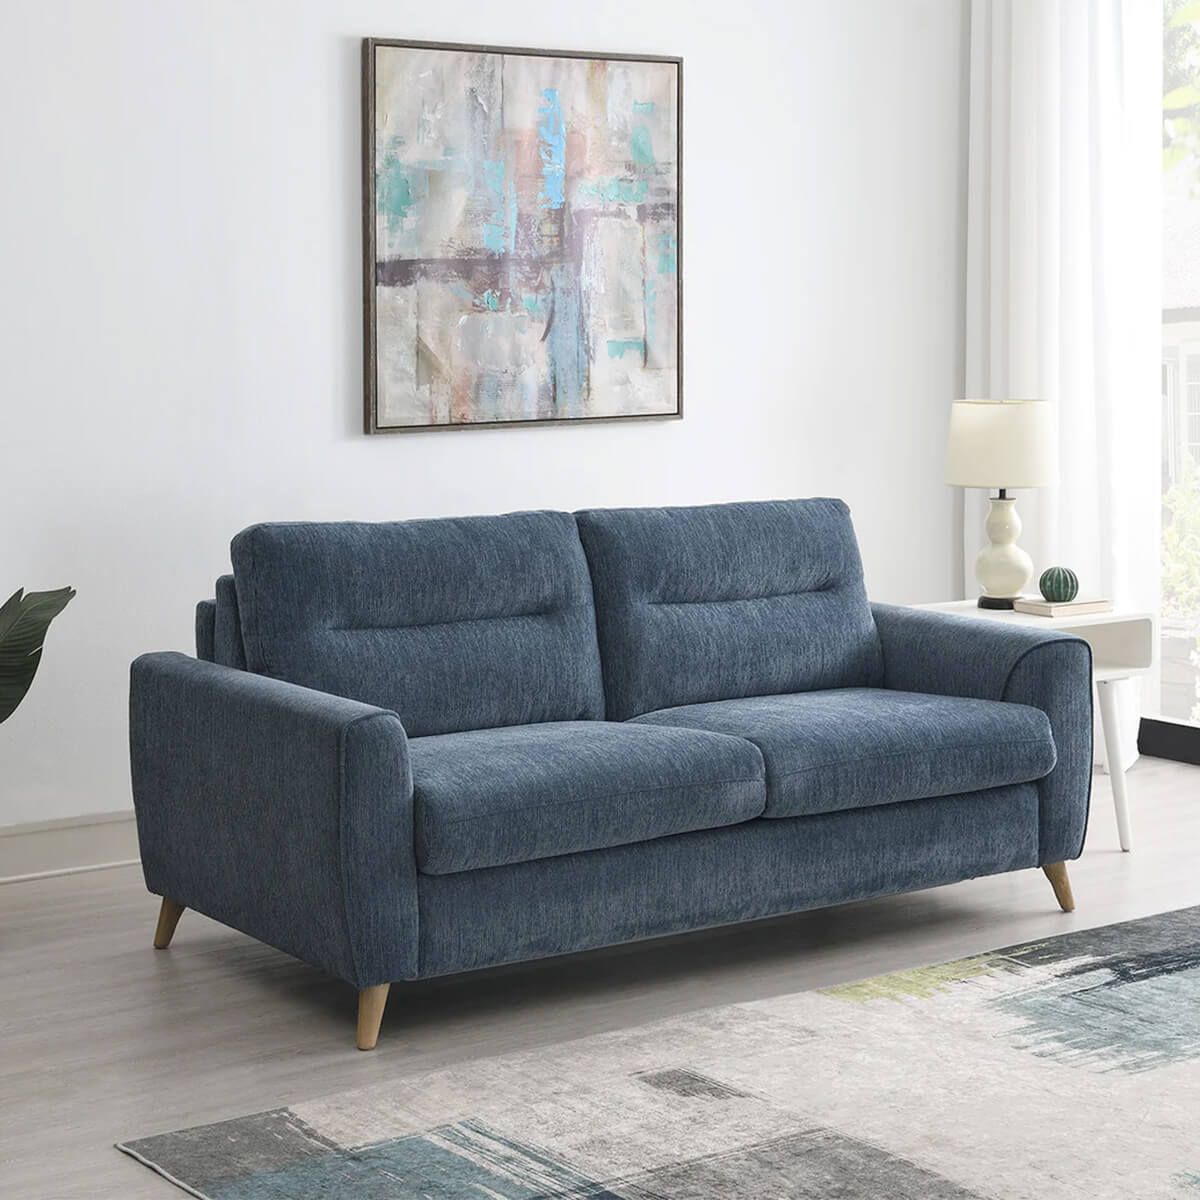 Cantrell Sofa Bed - Blue